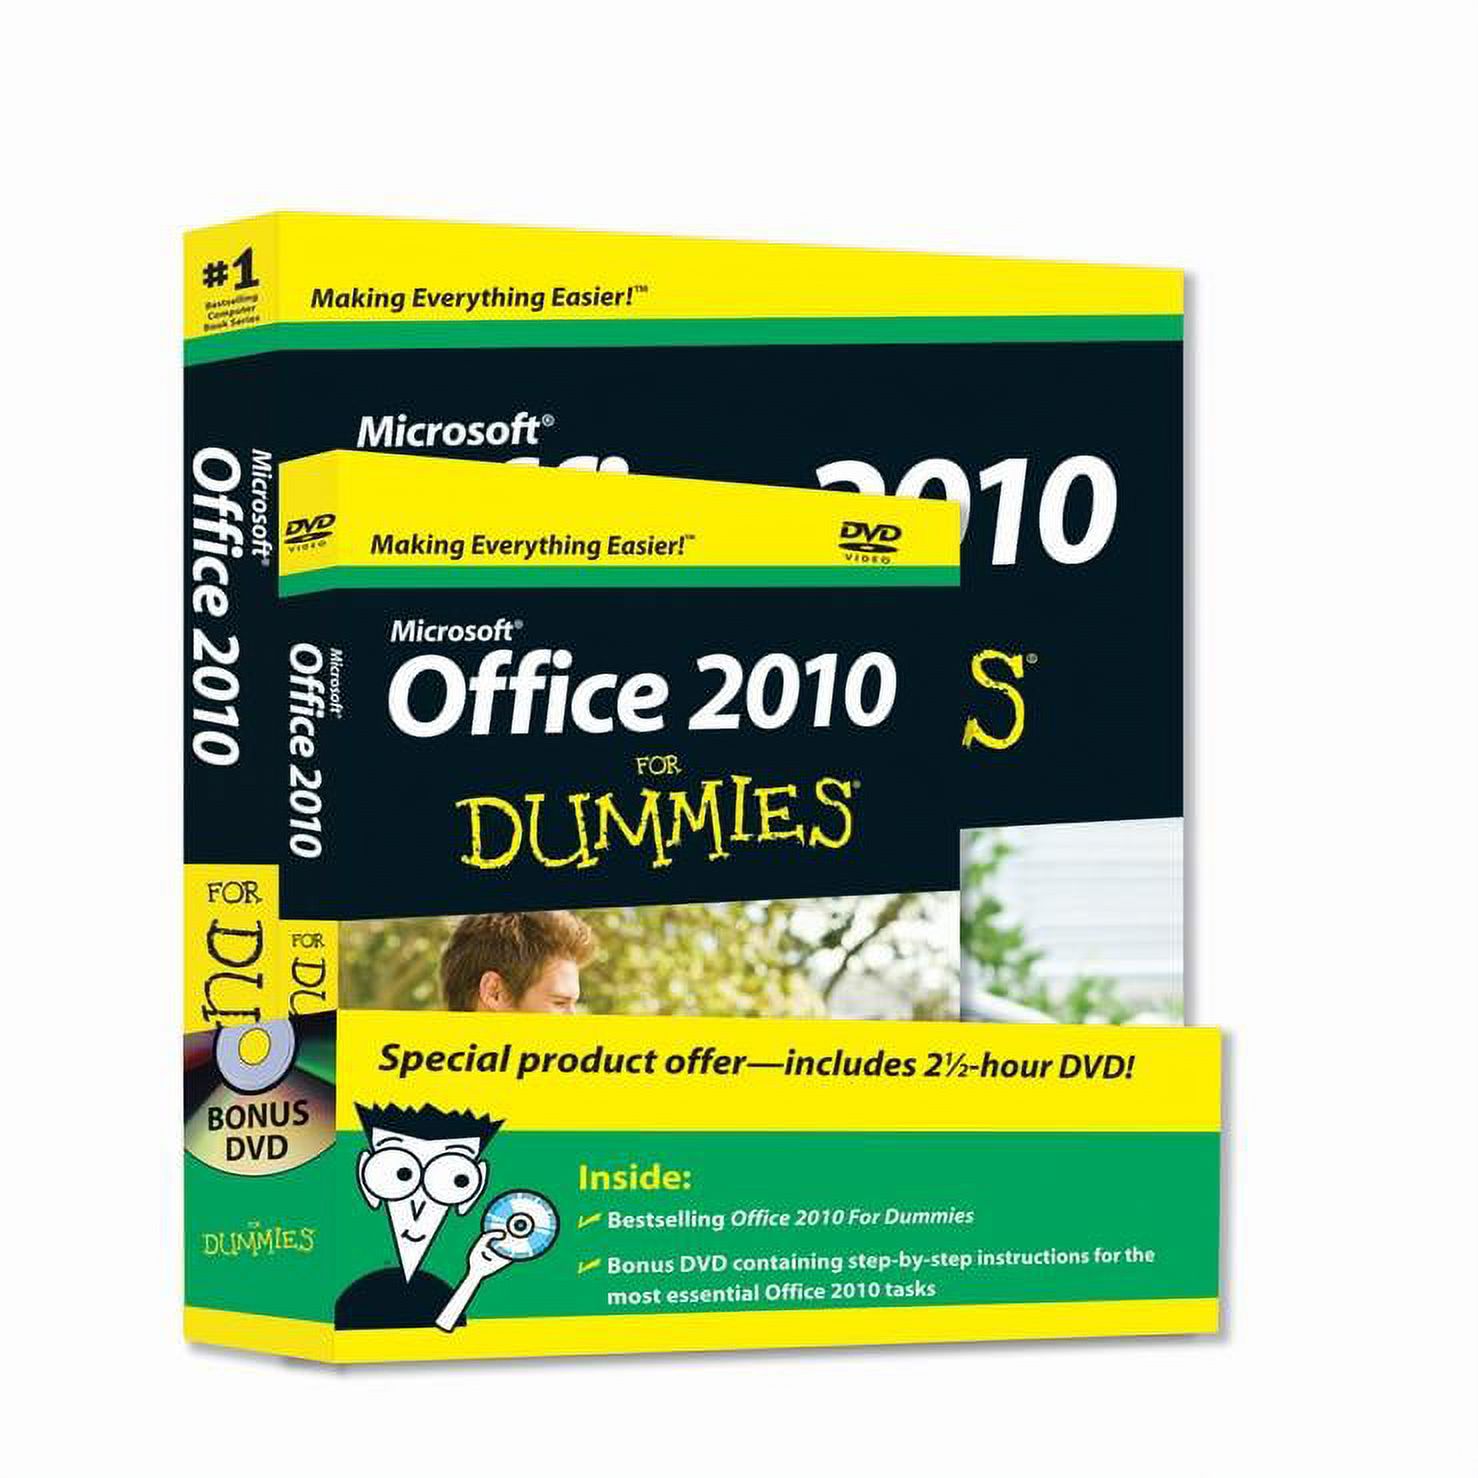 For Dummies: Microsoft Office 2010 for Dummies (Other) - image 1 of 1